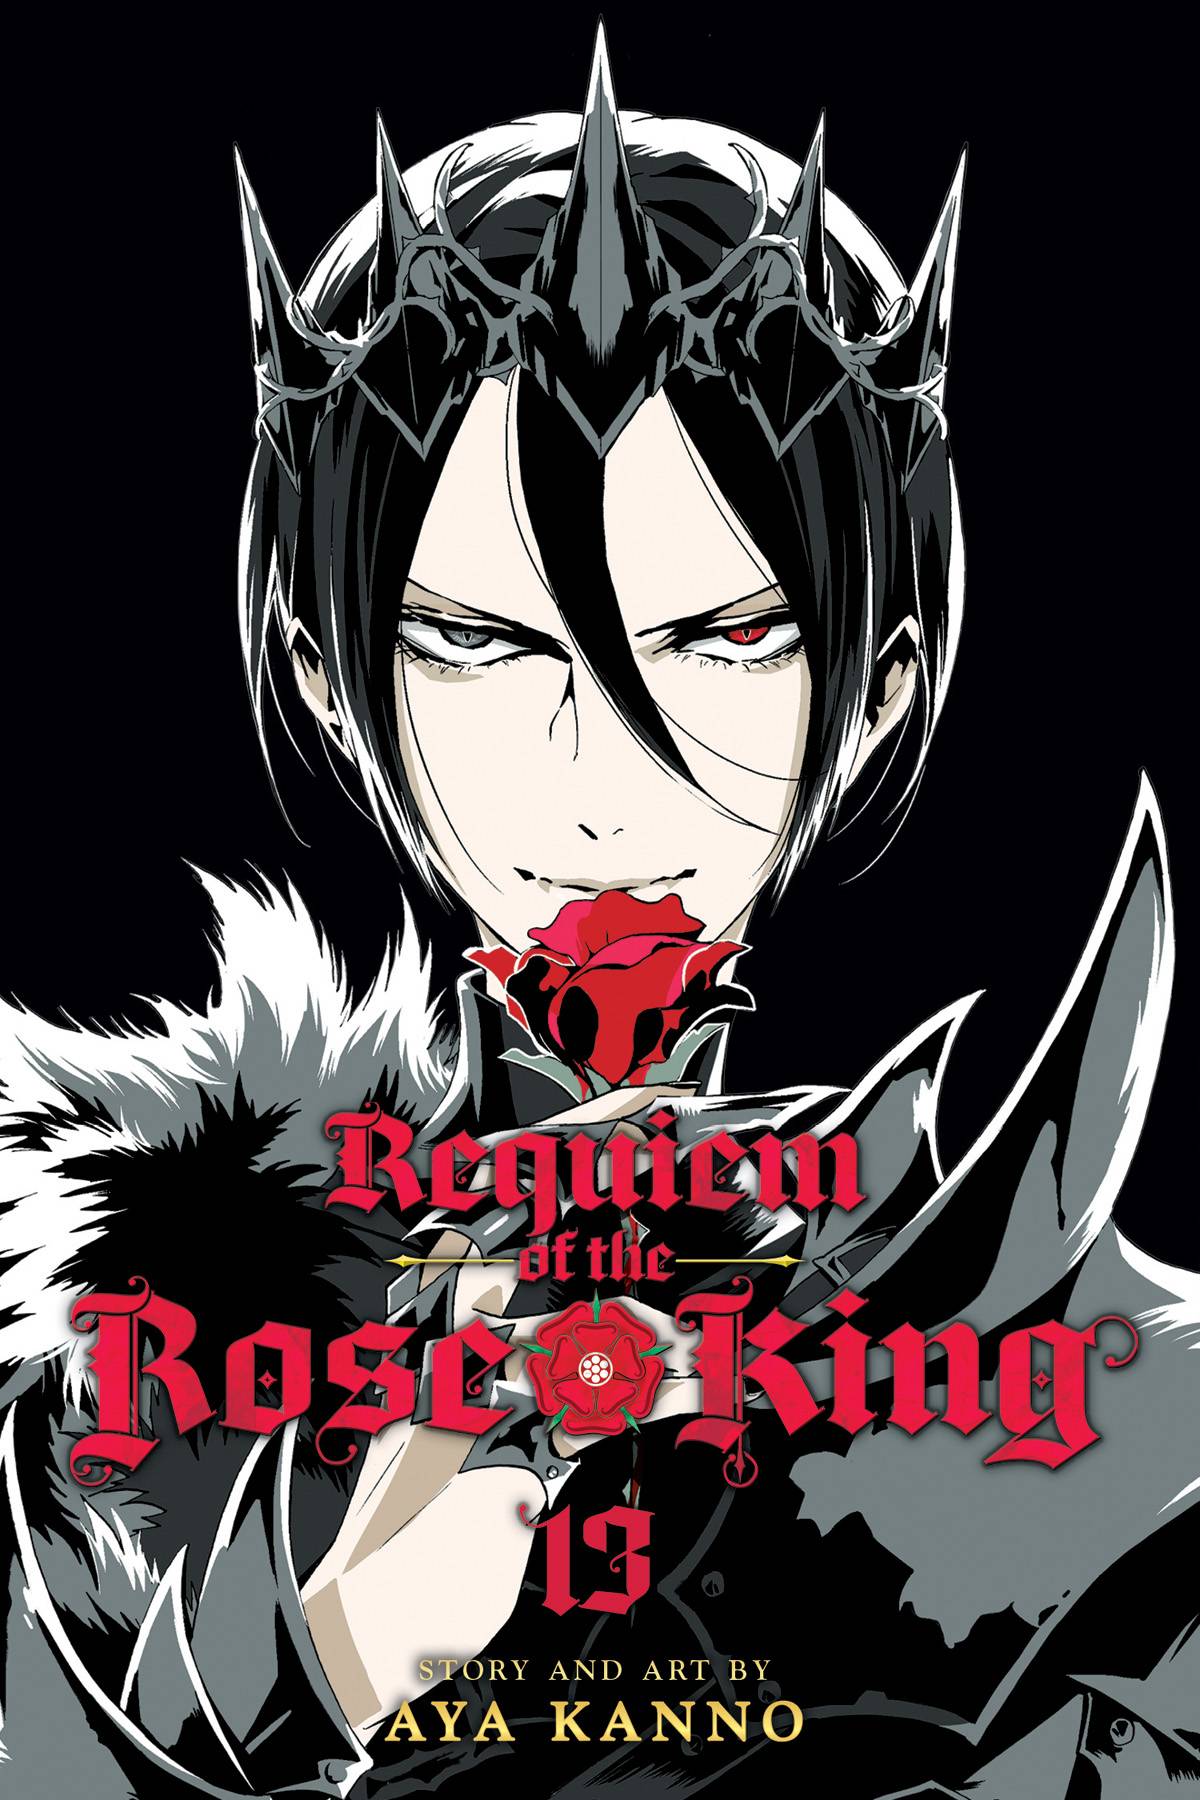 Requiem of the Rose King #13 (2020)